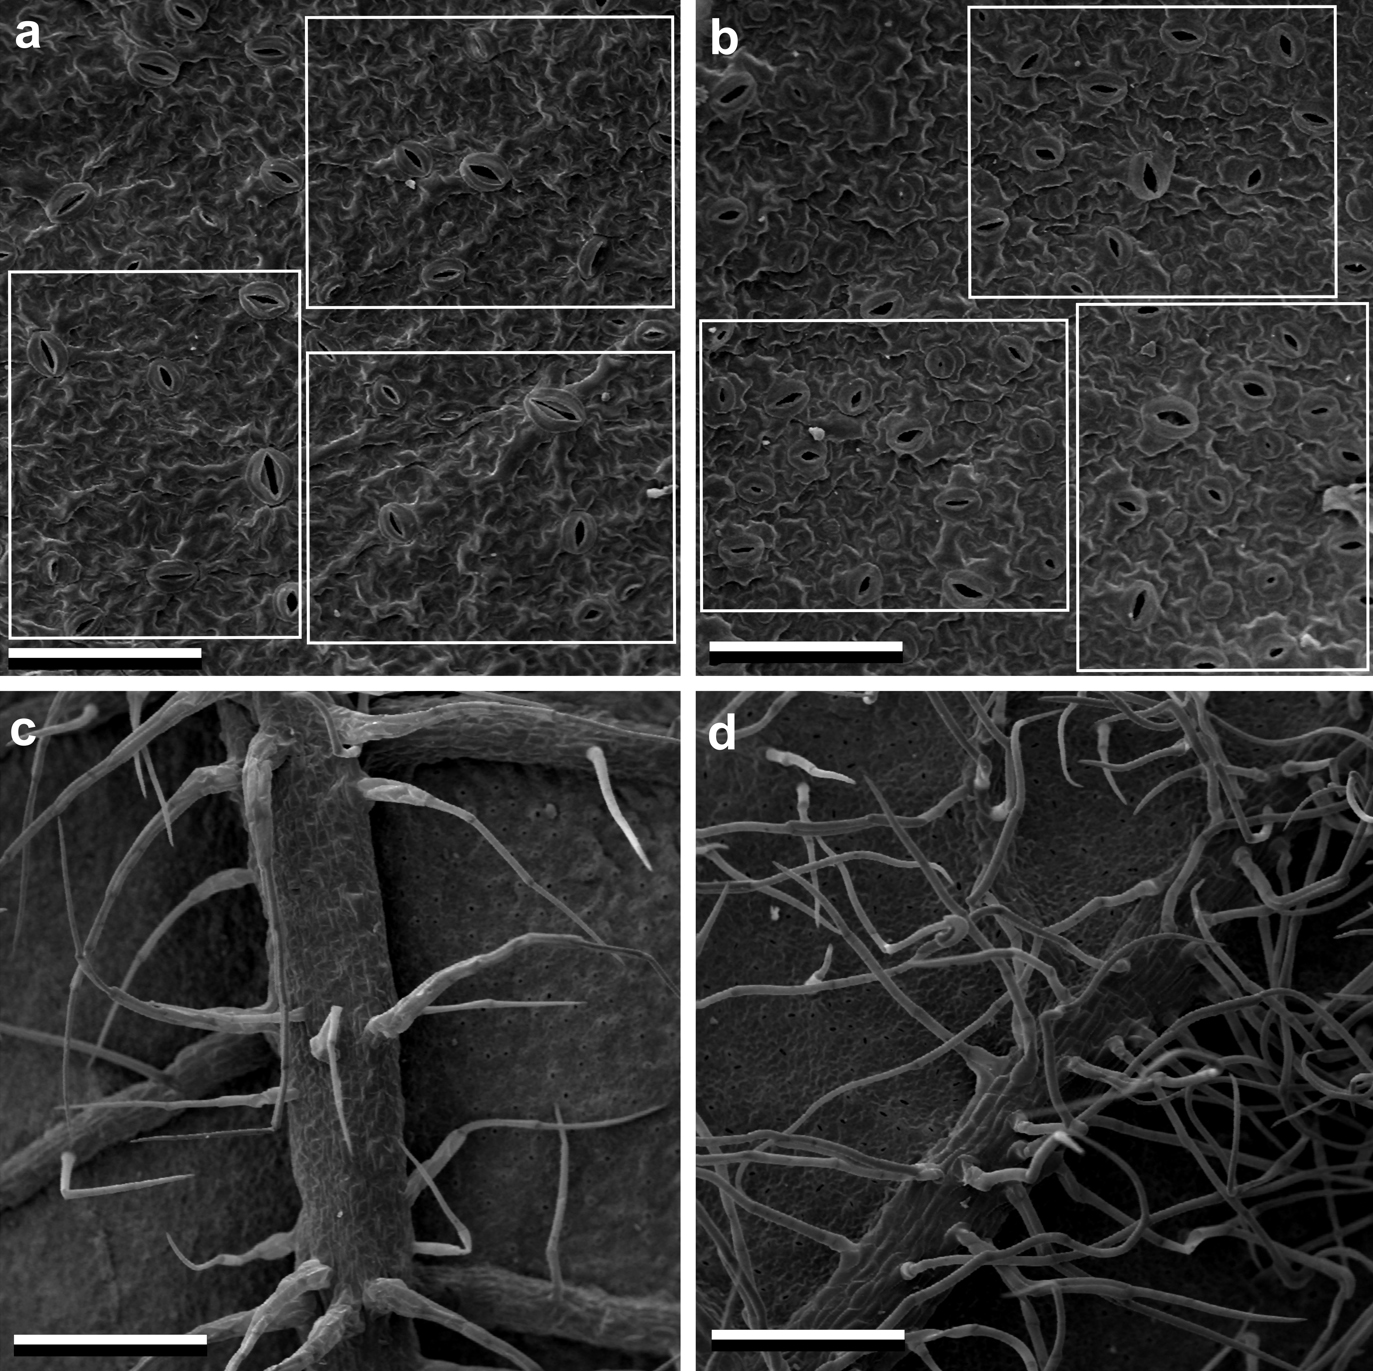 Fig. 1. SEM images of abaxial leaves surface of plantlets germinated from seeds (a, c) and endosperm-derived regenerants (b, d). a, b – epidermis with guard cells; white squares show area of 500 µm2; c, d – vascular veins with leaf hairs. Bars: 130 µm (a, b), 600 µm (c, d).